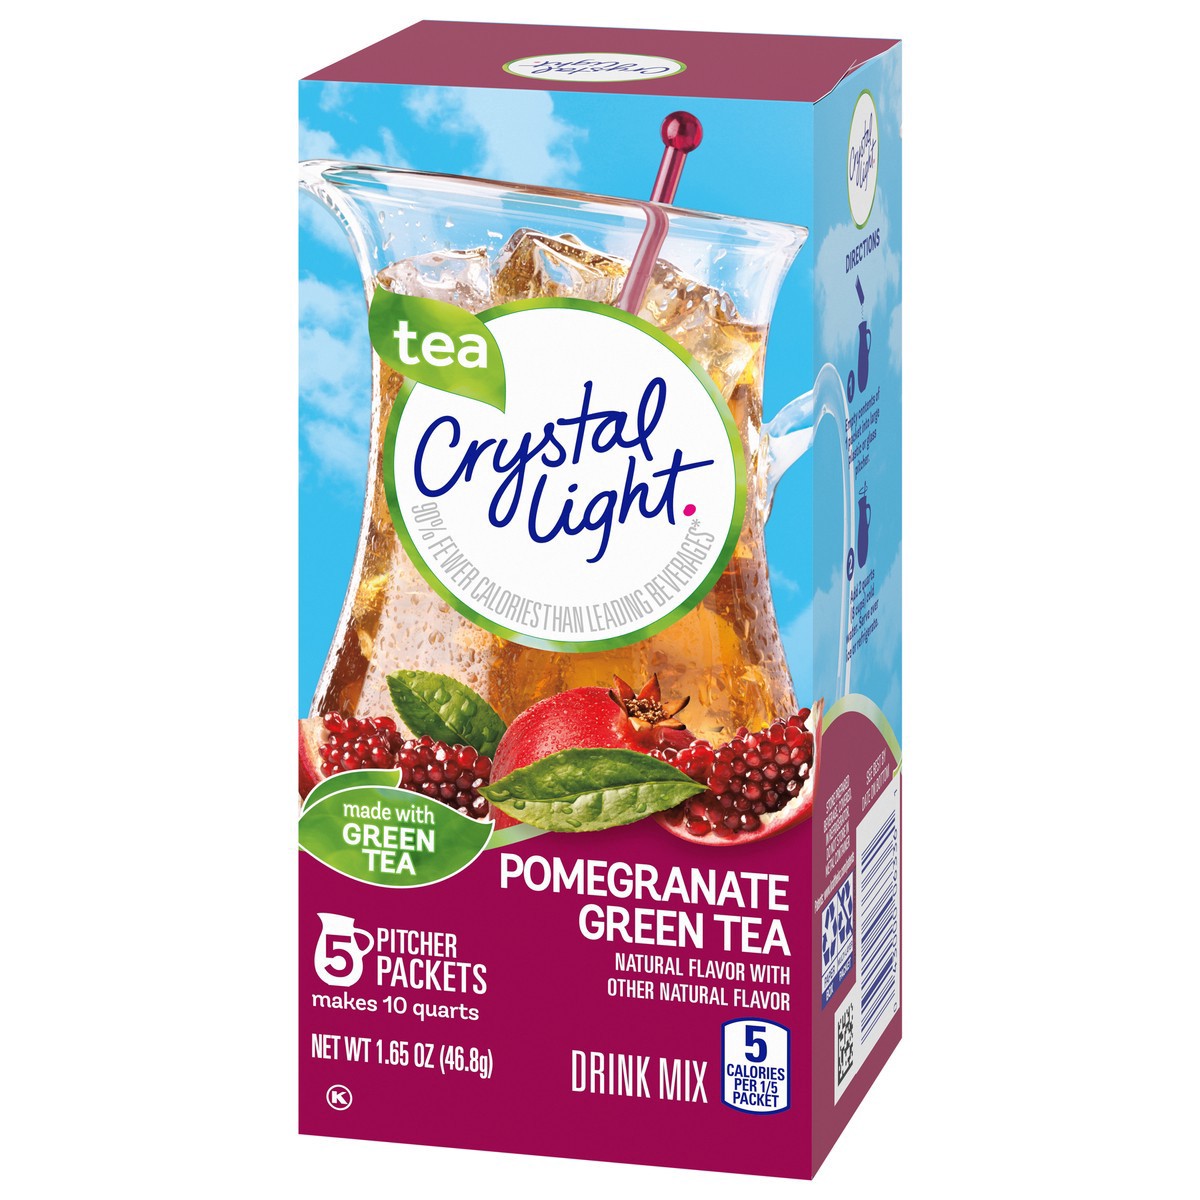 slide 5 of 14, Crystal Light Pomegranate Green Tea Naturally Flavored Powdered Drink Mix, 5 ct Pitcher Packets, 5 ct